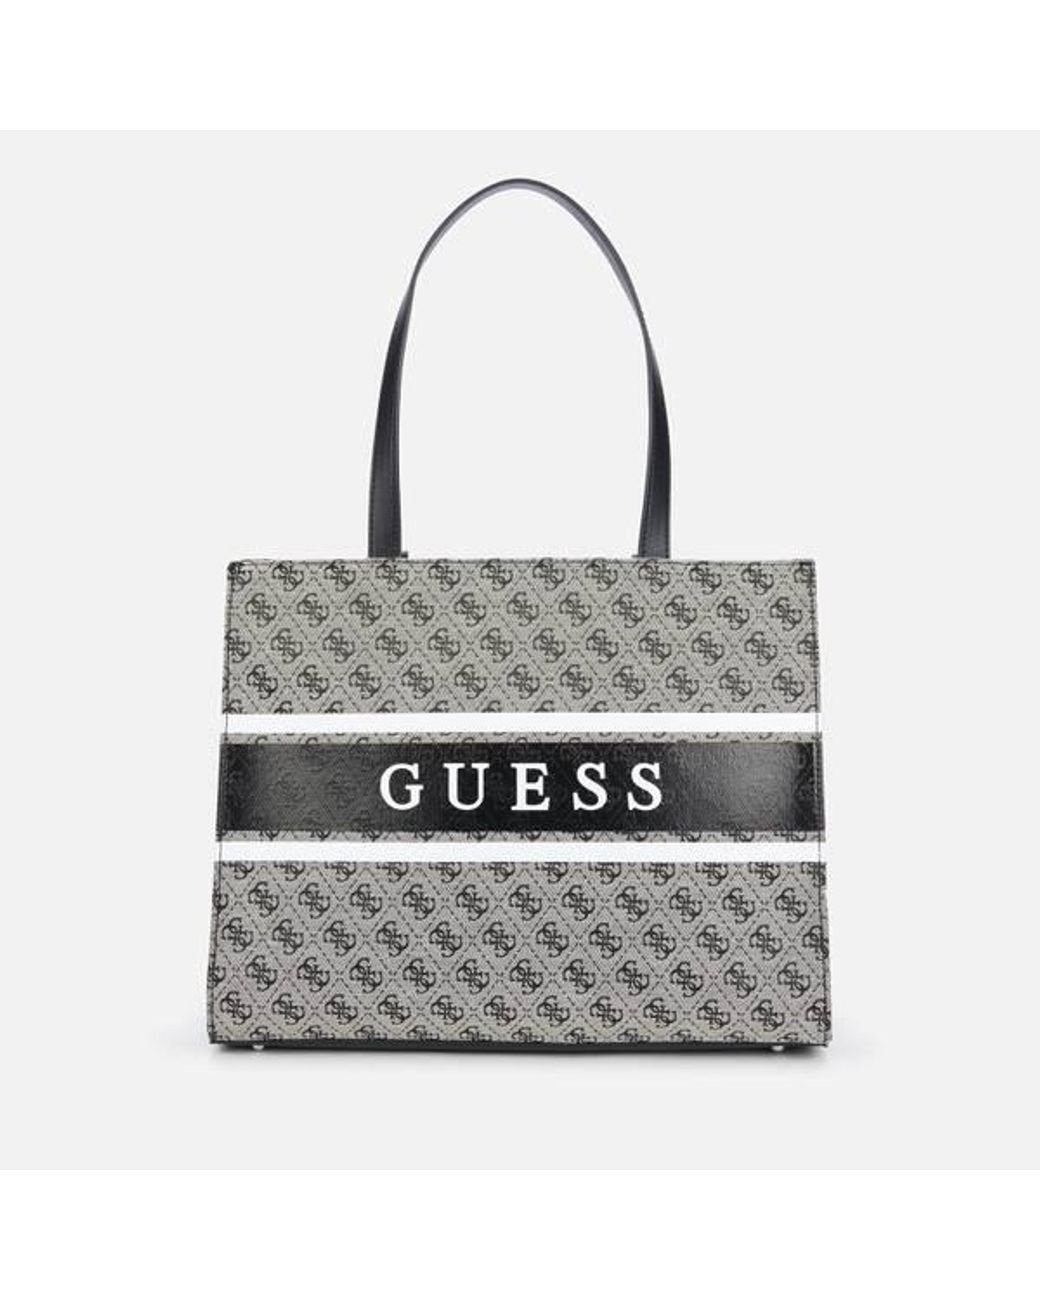 Guess Monique Tote Bag in Gray | Lyst